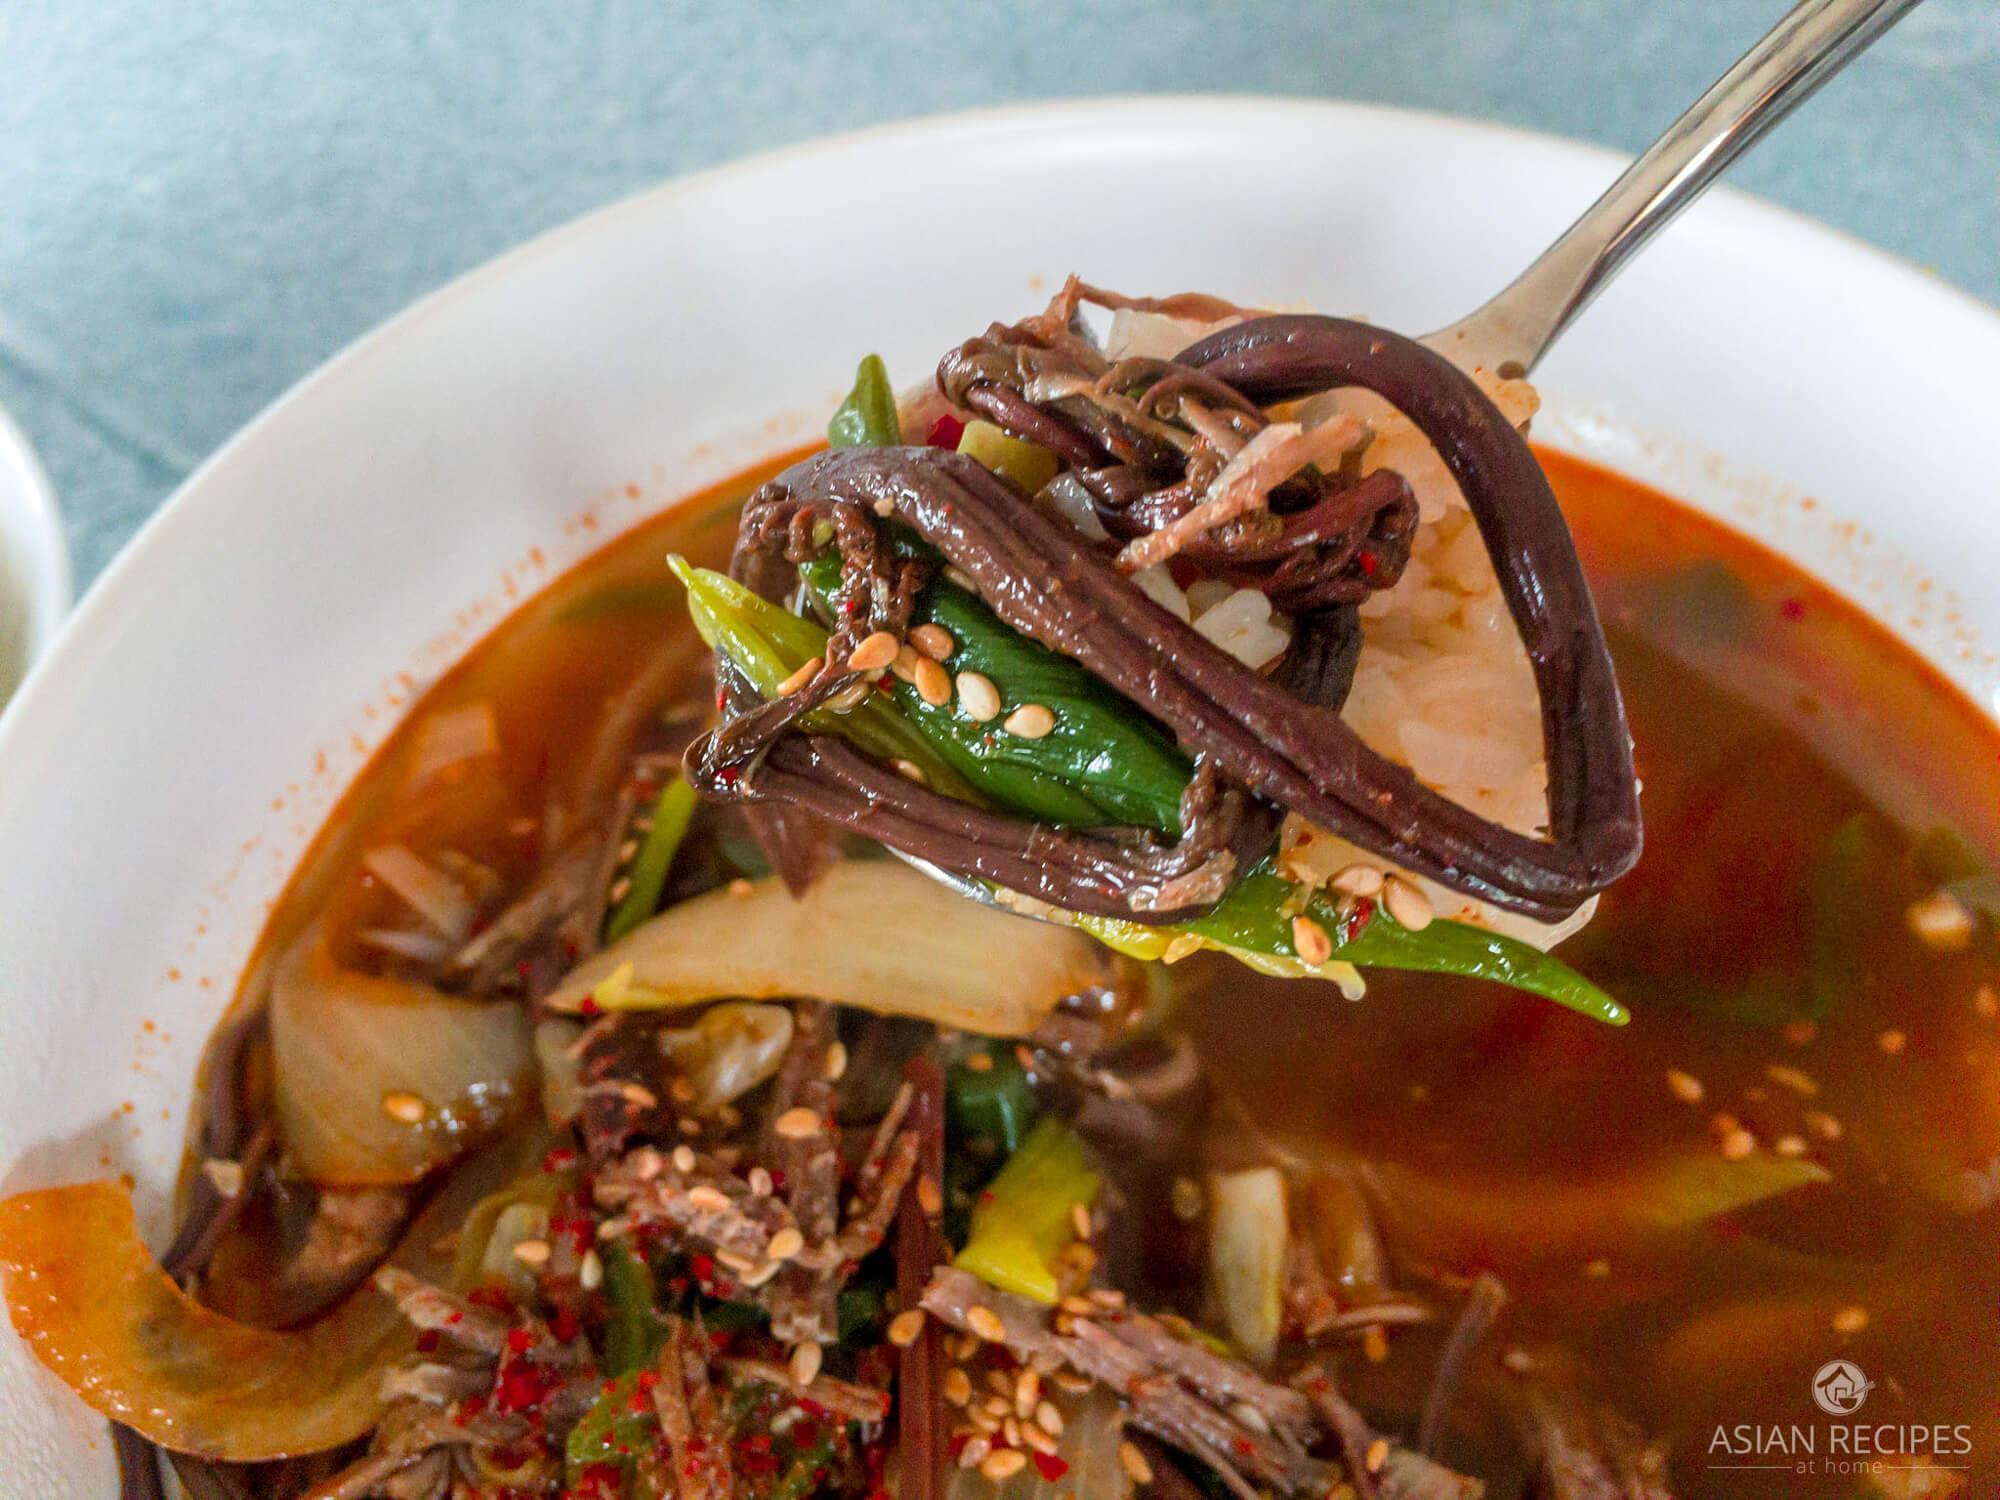 This Korean spicy stew recipe is filled with shredded beef, onions and fernbrake (gosari).